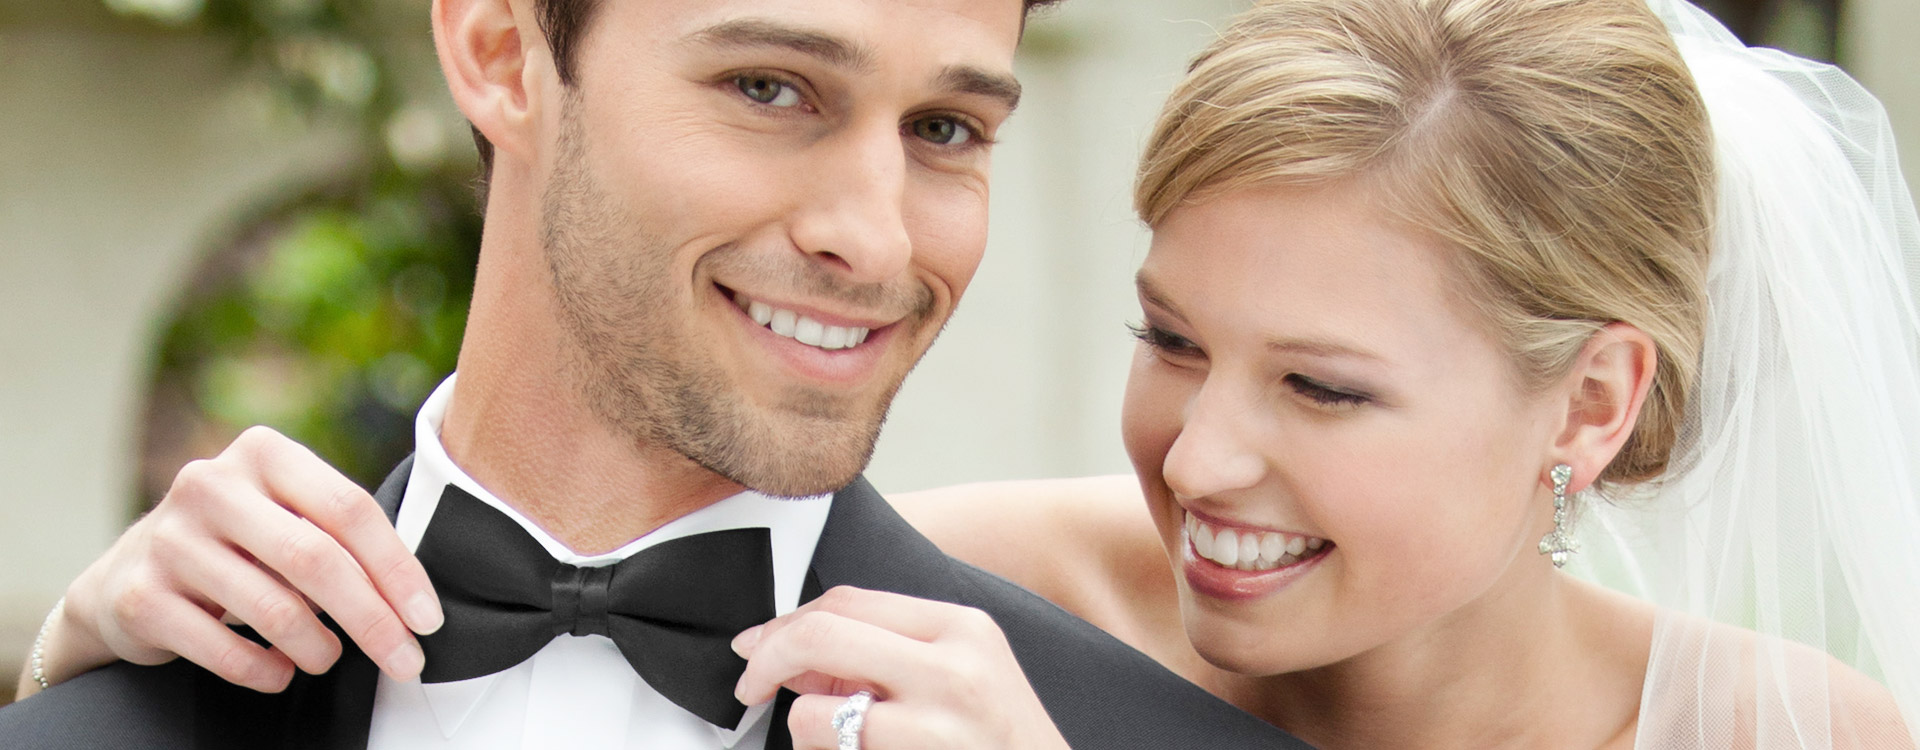 Tuxedo & Suit Rental Fitting Guide